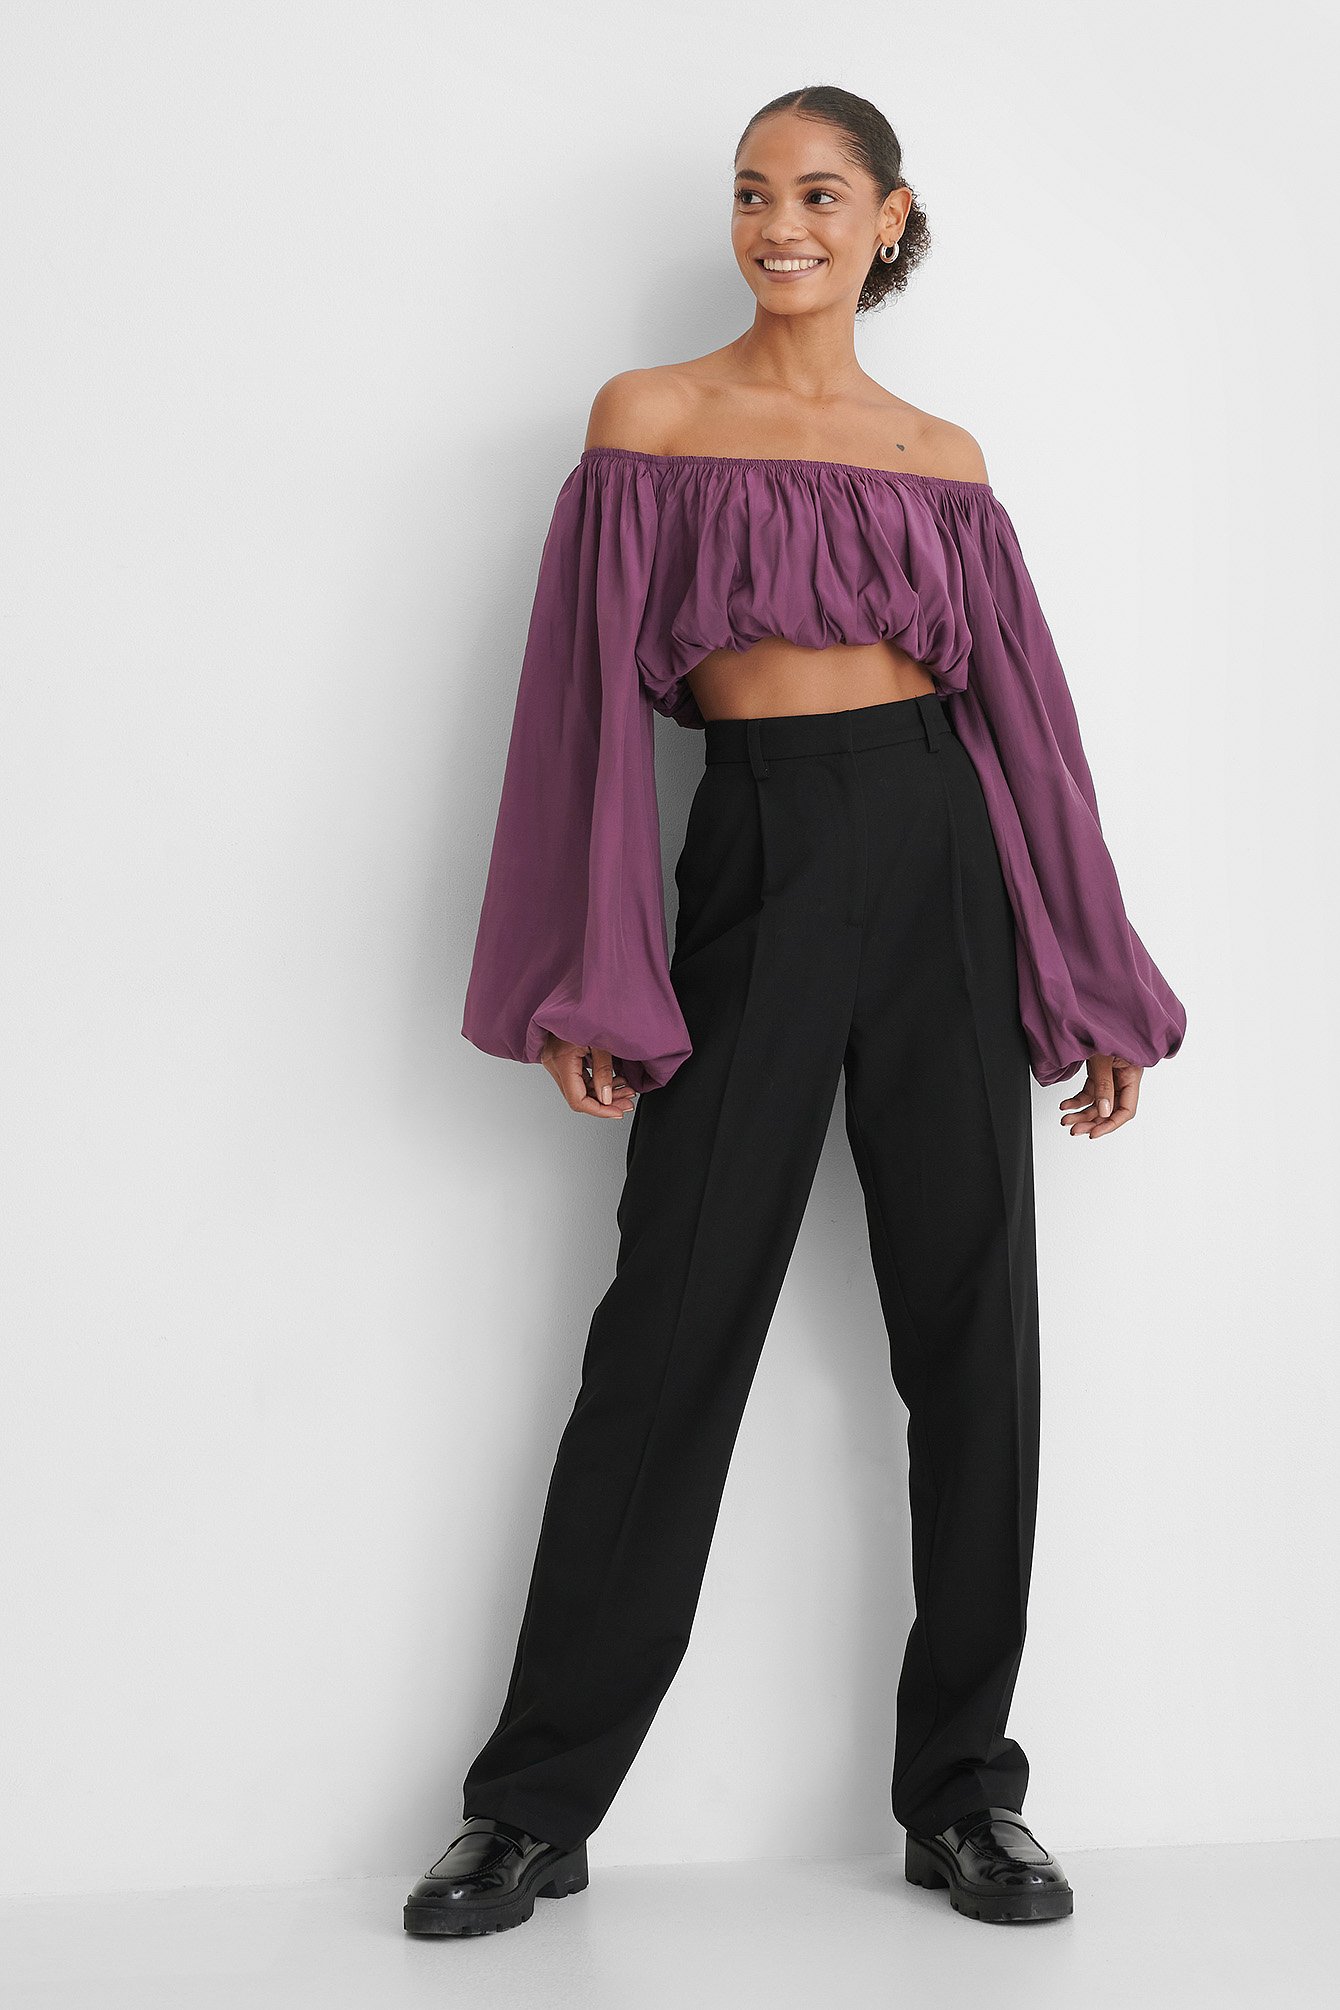 Balloon Long Sleeved Cropped Top Outfit.